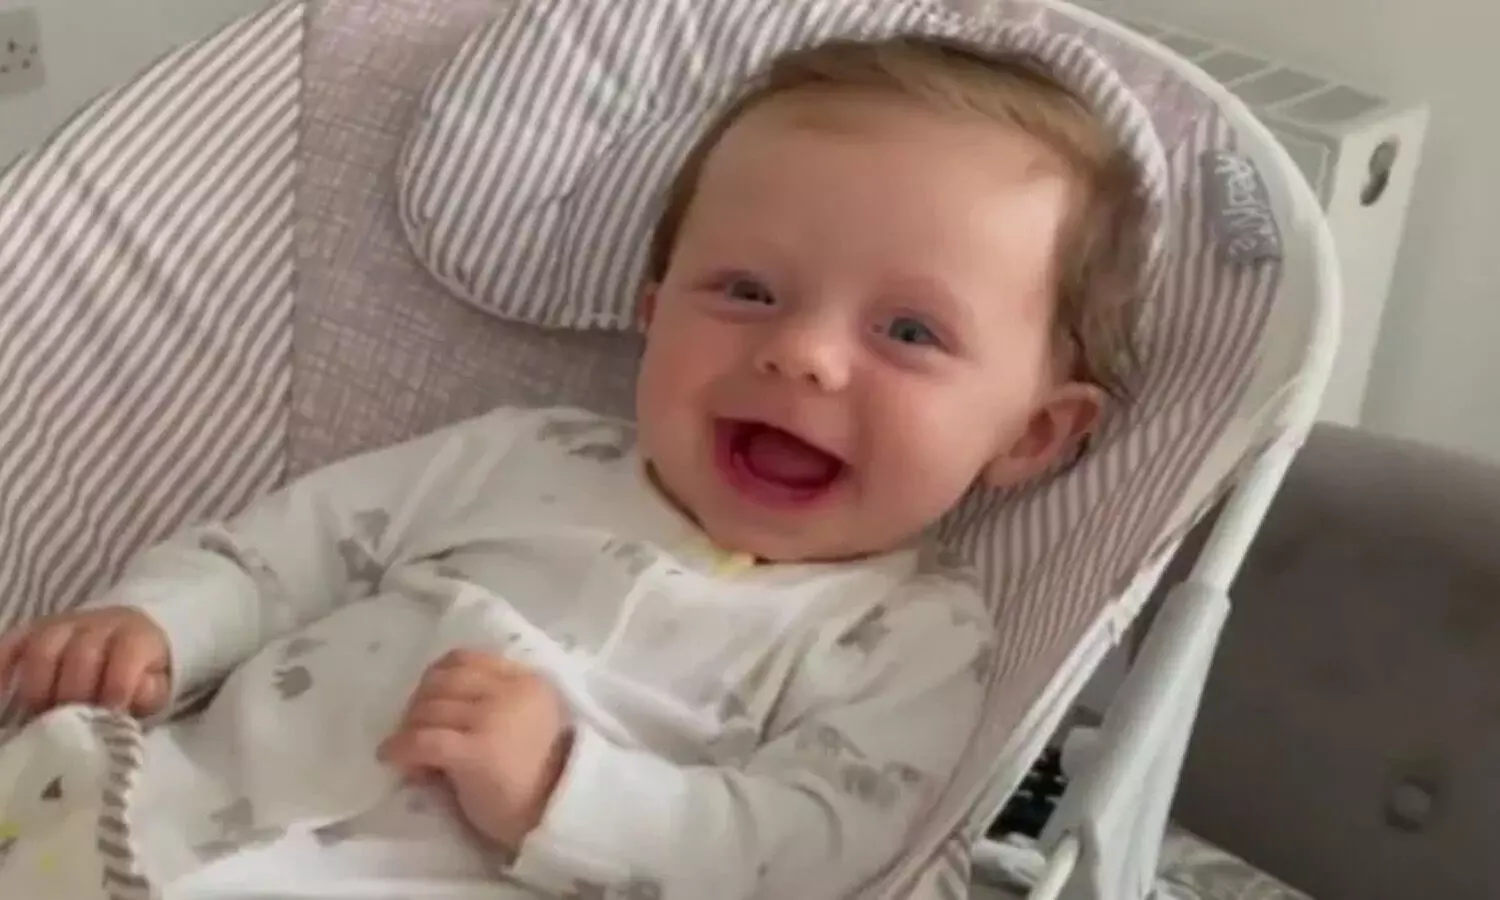 Britain: A 5-month-old toddler turning into STONE, Know about the disease